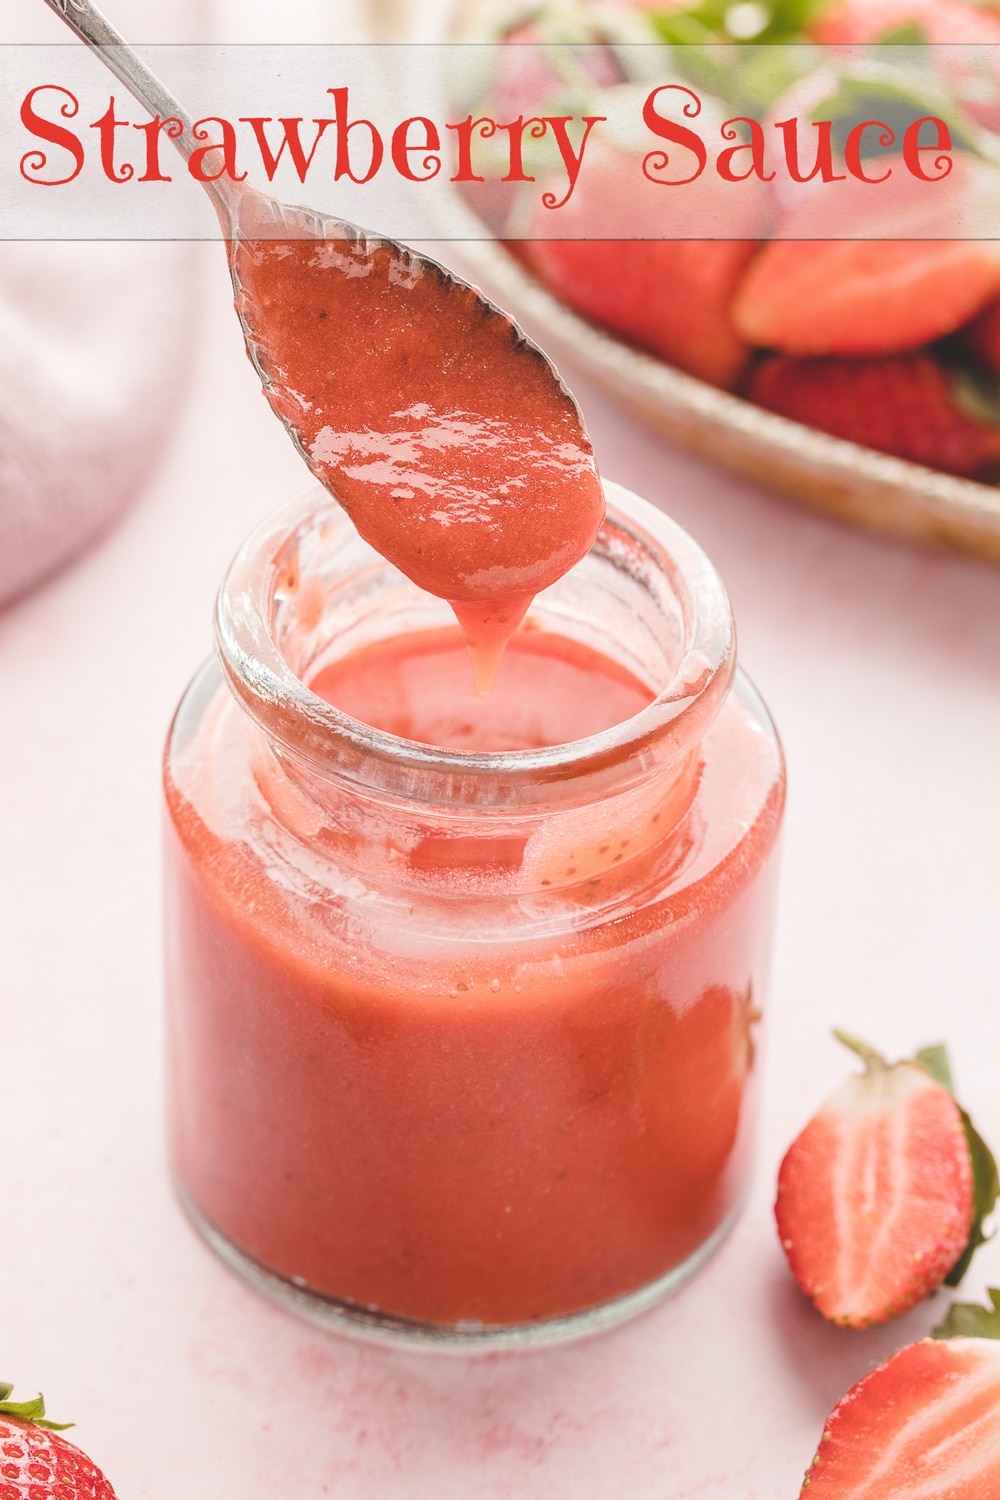 Indulge in the Sweetness of Summer with this irresistible Strawberry Topping recipe! It’s the Best Fresh Strawberry Recipe to dive into and the perfect dessert recipe for summer. Use this strawberry sauce as a finishing touch on everything from waffles to pancakes, on top of cheesecake, drizzled over vanilla ice cream or spooned over shortcake via @cmpollak1